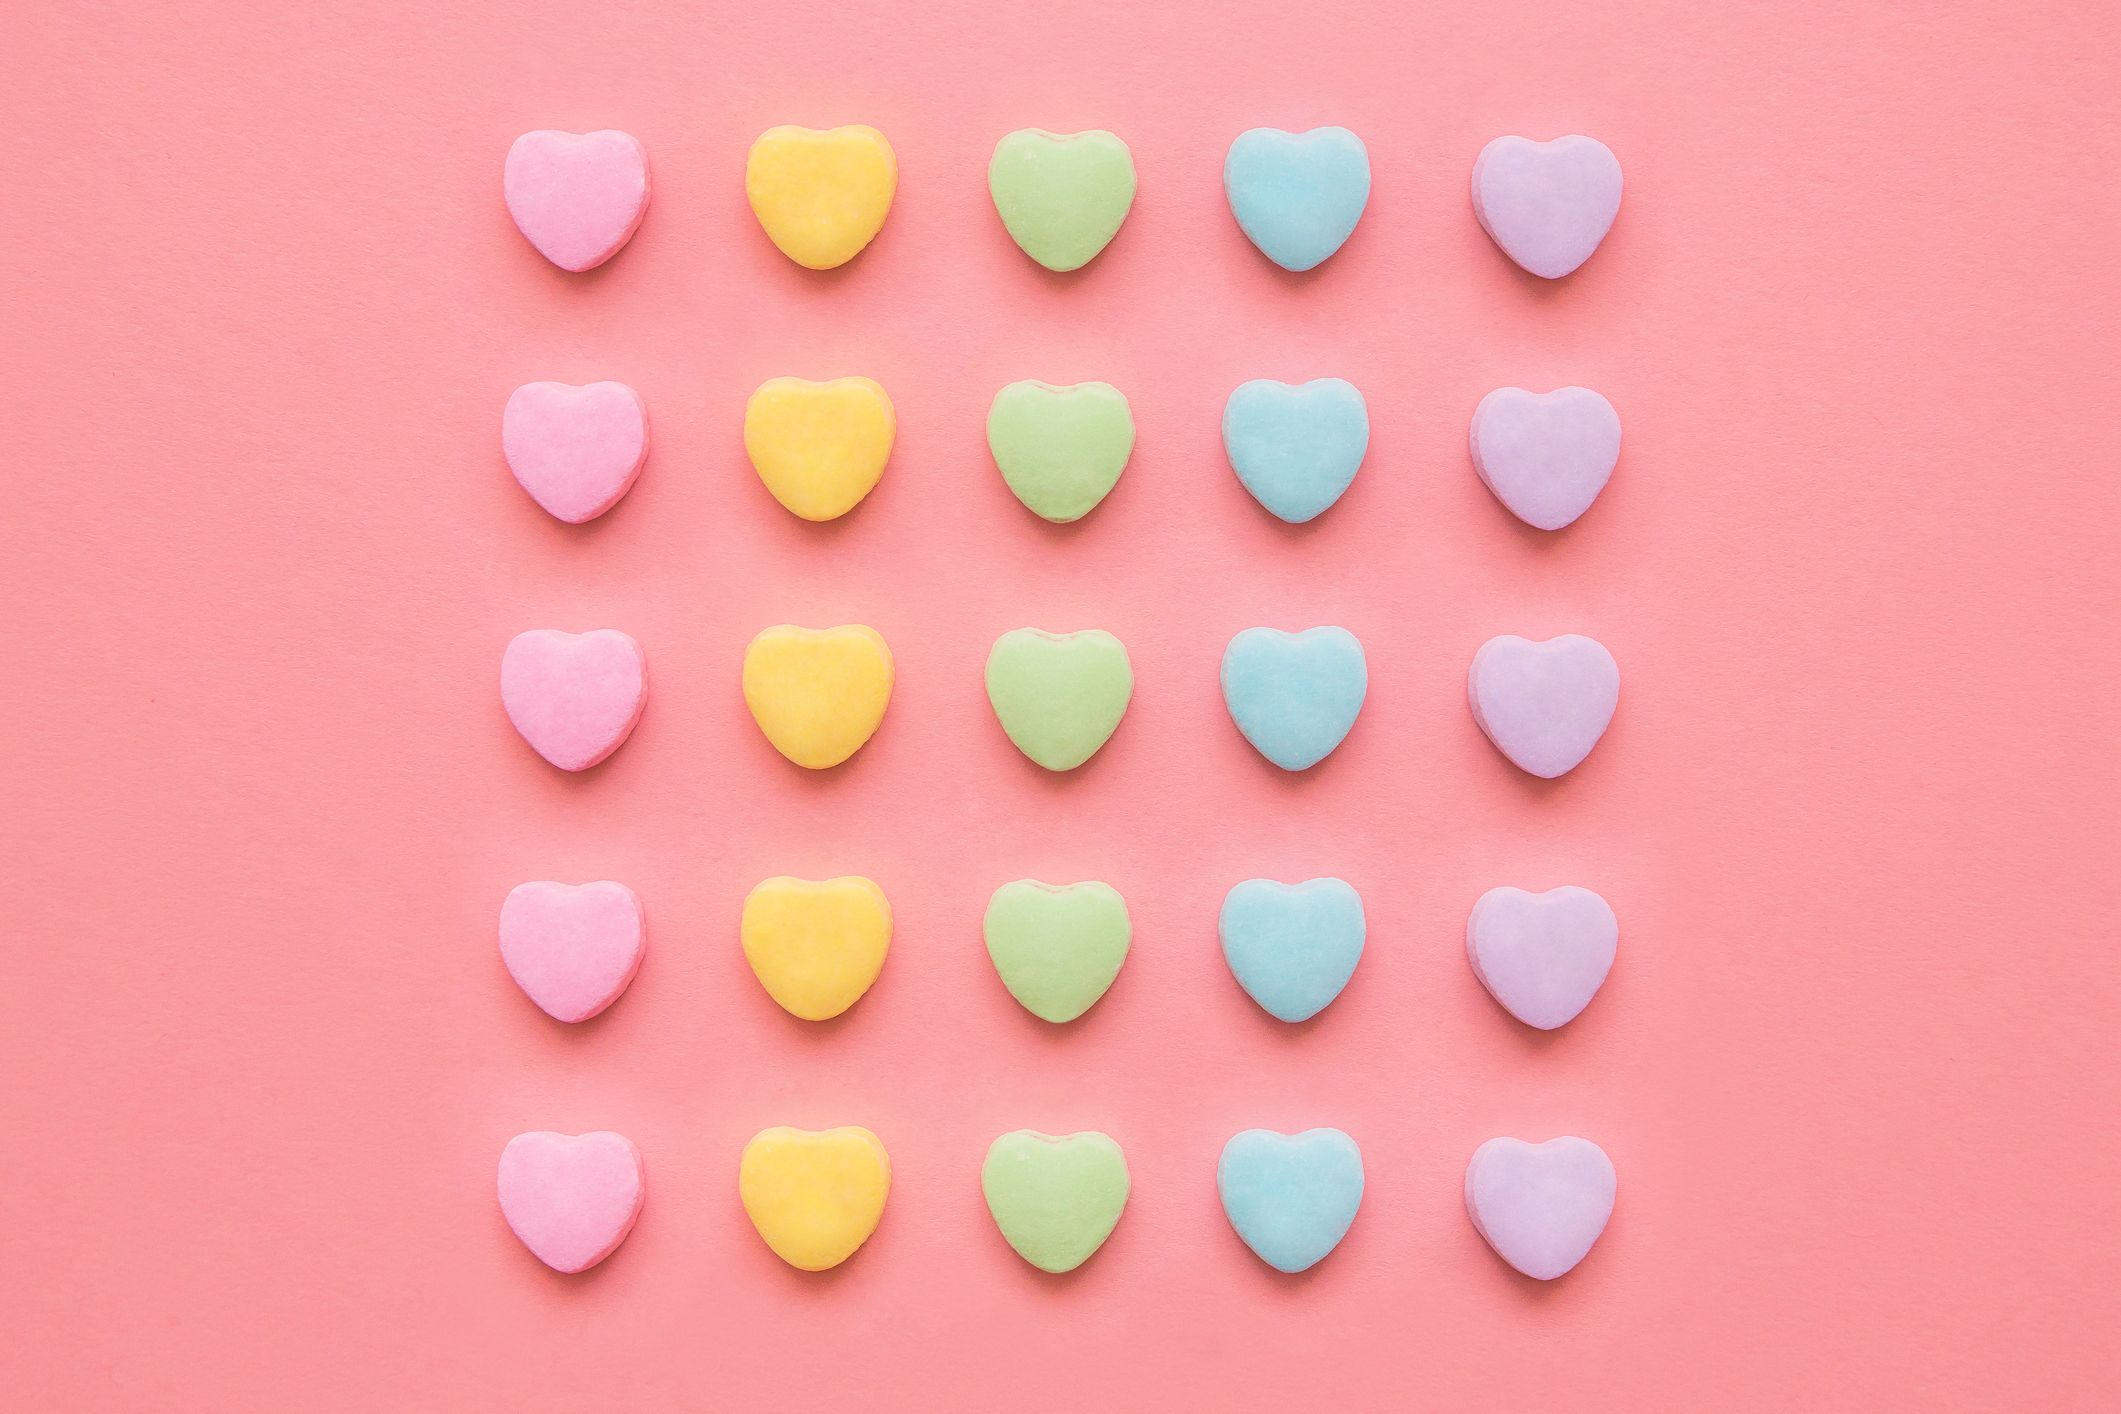 Love hearts background. Candy hearts on a pink background for Valentine&#039;s Day or anytime. Conceptual image to symbolism dating, marriage and/or equality, gay pride, or OCD and order.